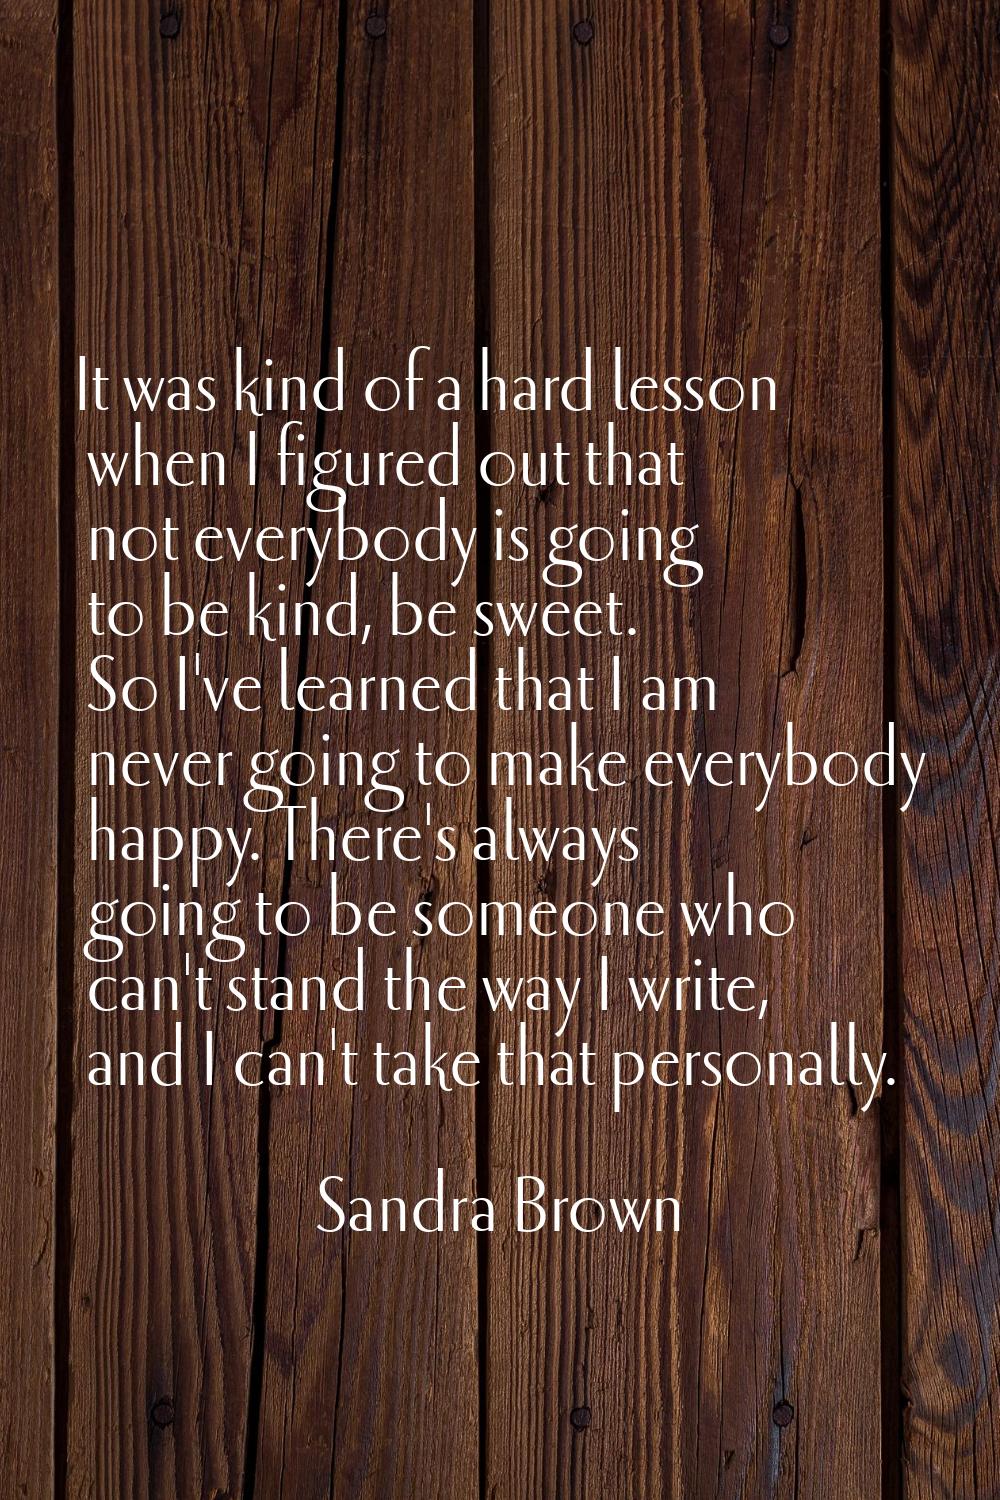 It was kind of a hard lesson when I figured out that not everybody is going to be kind, be sweet. S